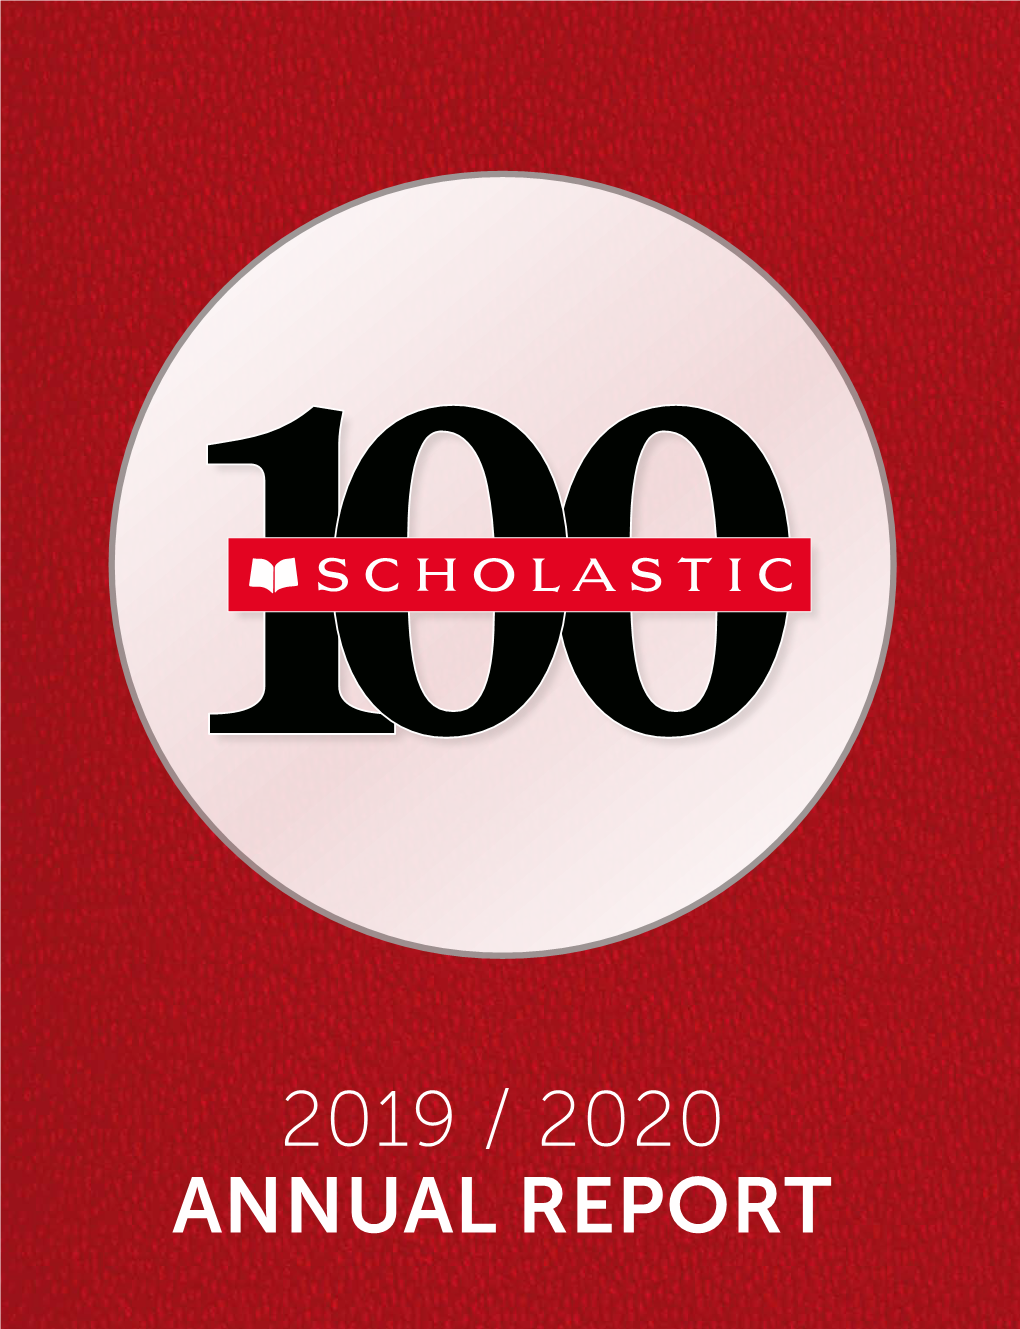 2019 / 2020 ANNUAL REPORT the People of Scholastic Were Focused on the Same Thing in 1920 That We Are Today–Understanding What Matters Most in a Child’S Life